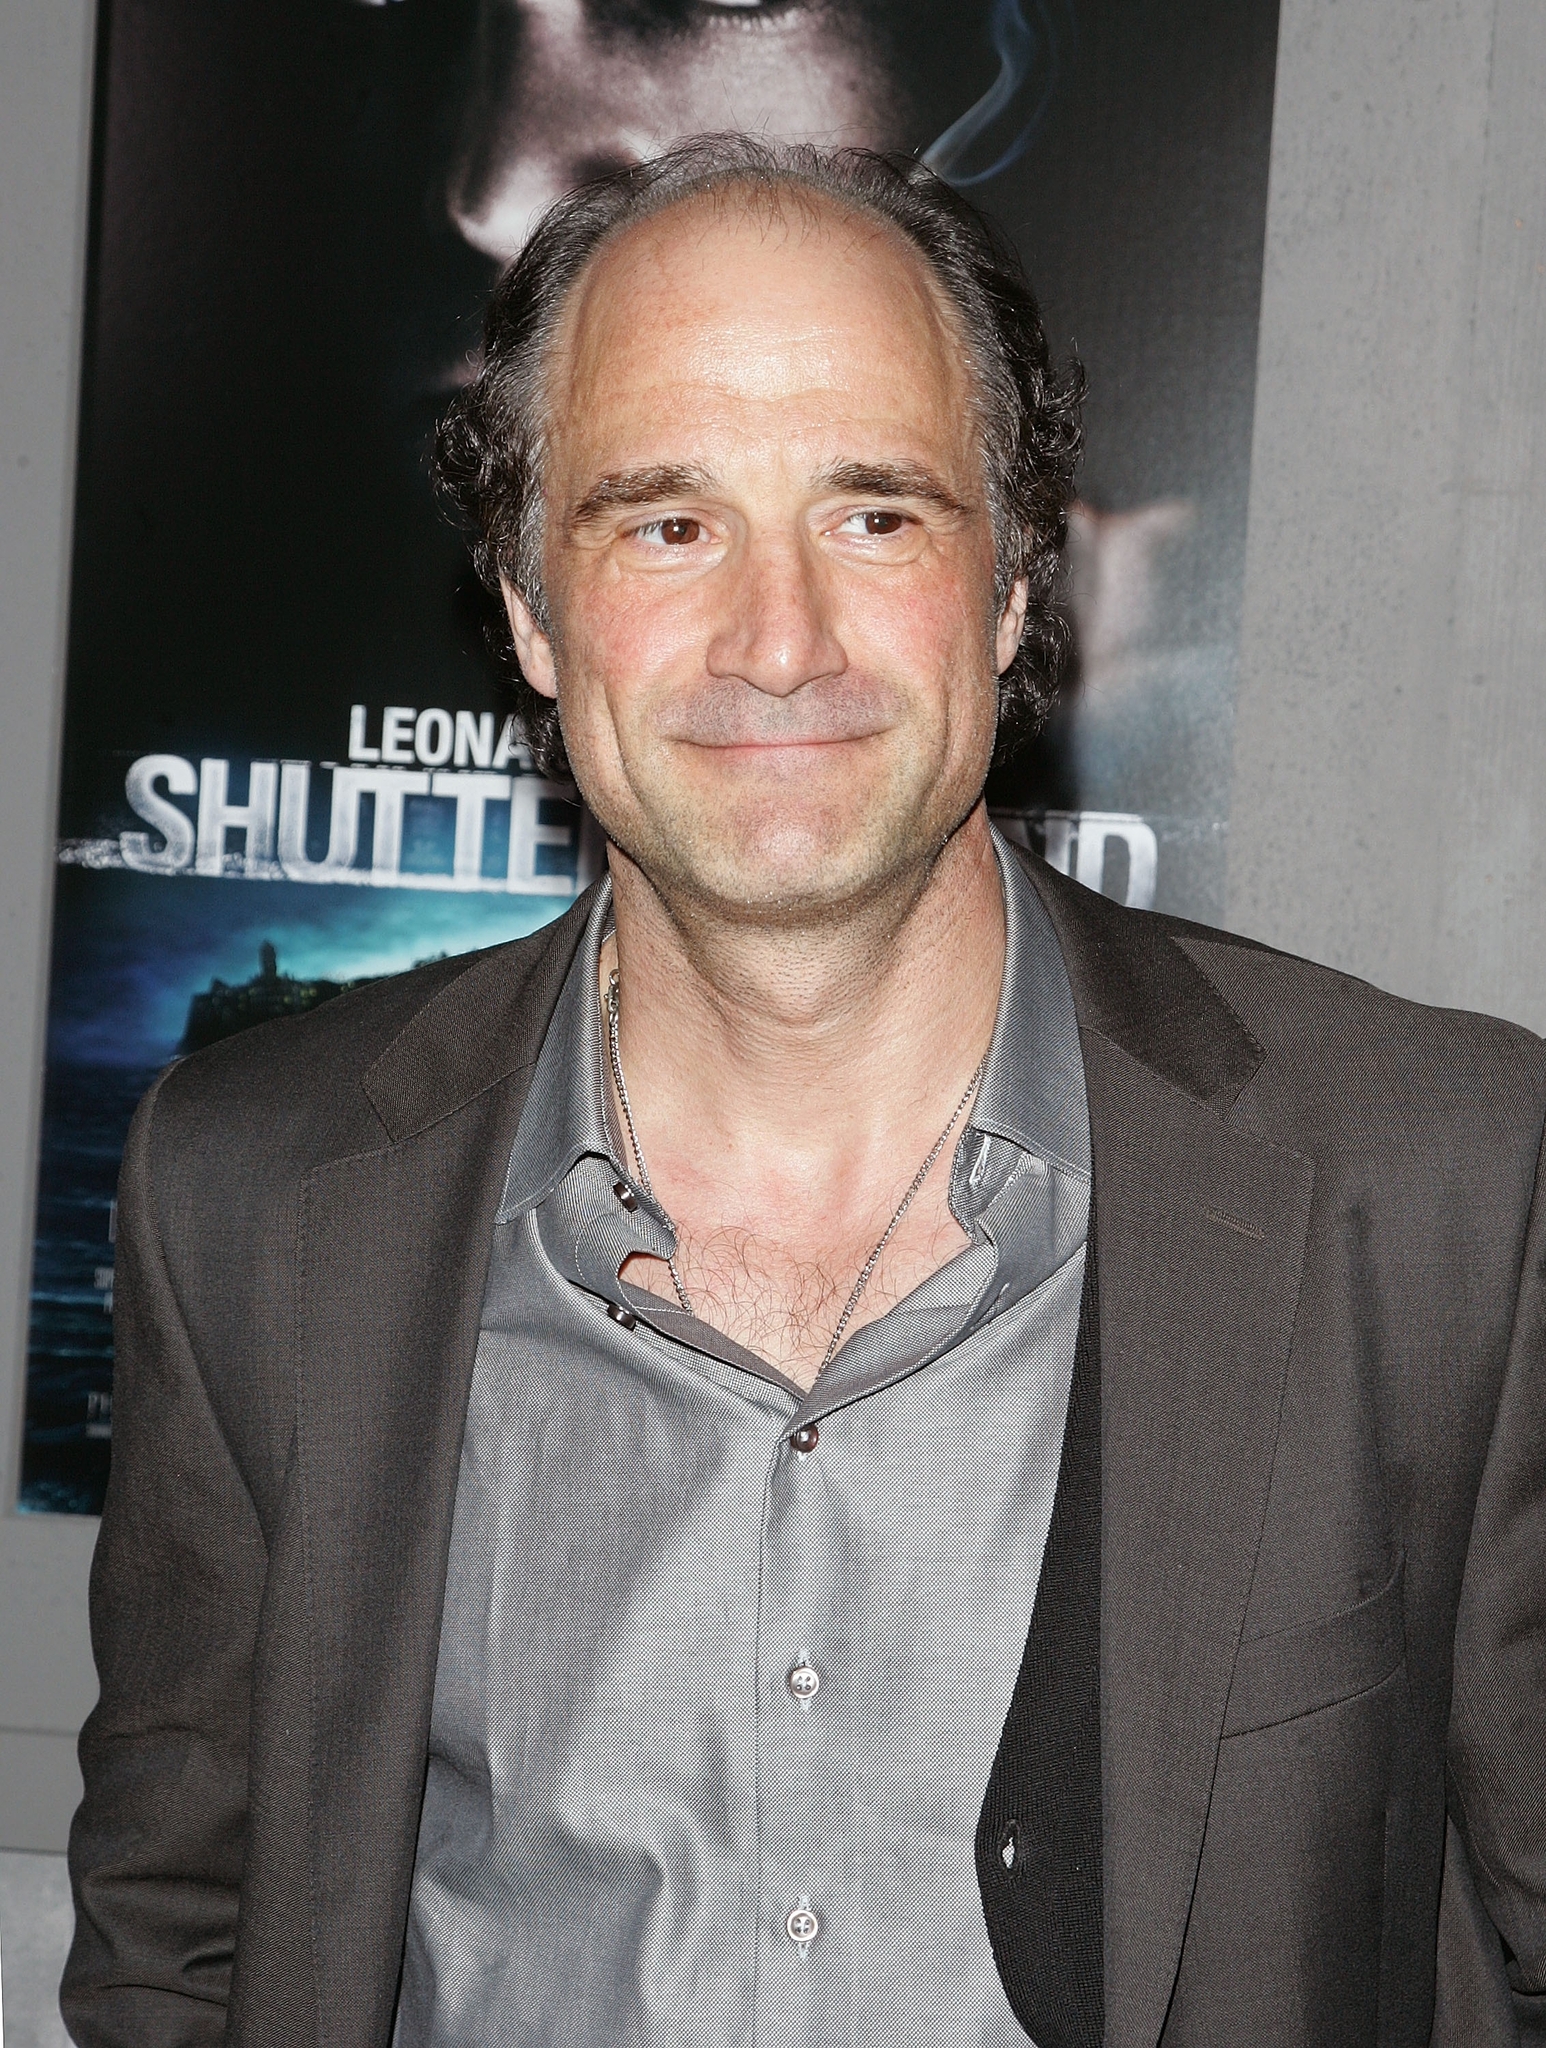 Actor Elias Koteas attends the 'Shutter Island' premiere at the Ziegfeld Theatre on February 17, 2010 in New York City.